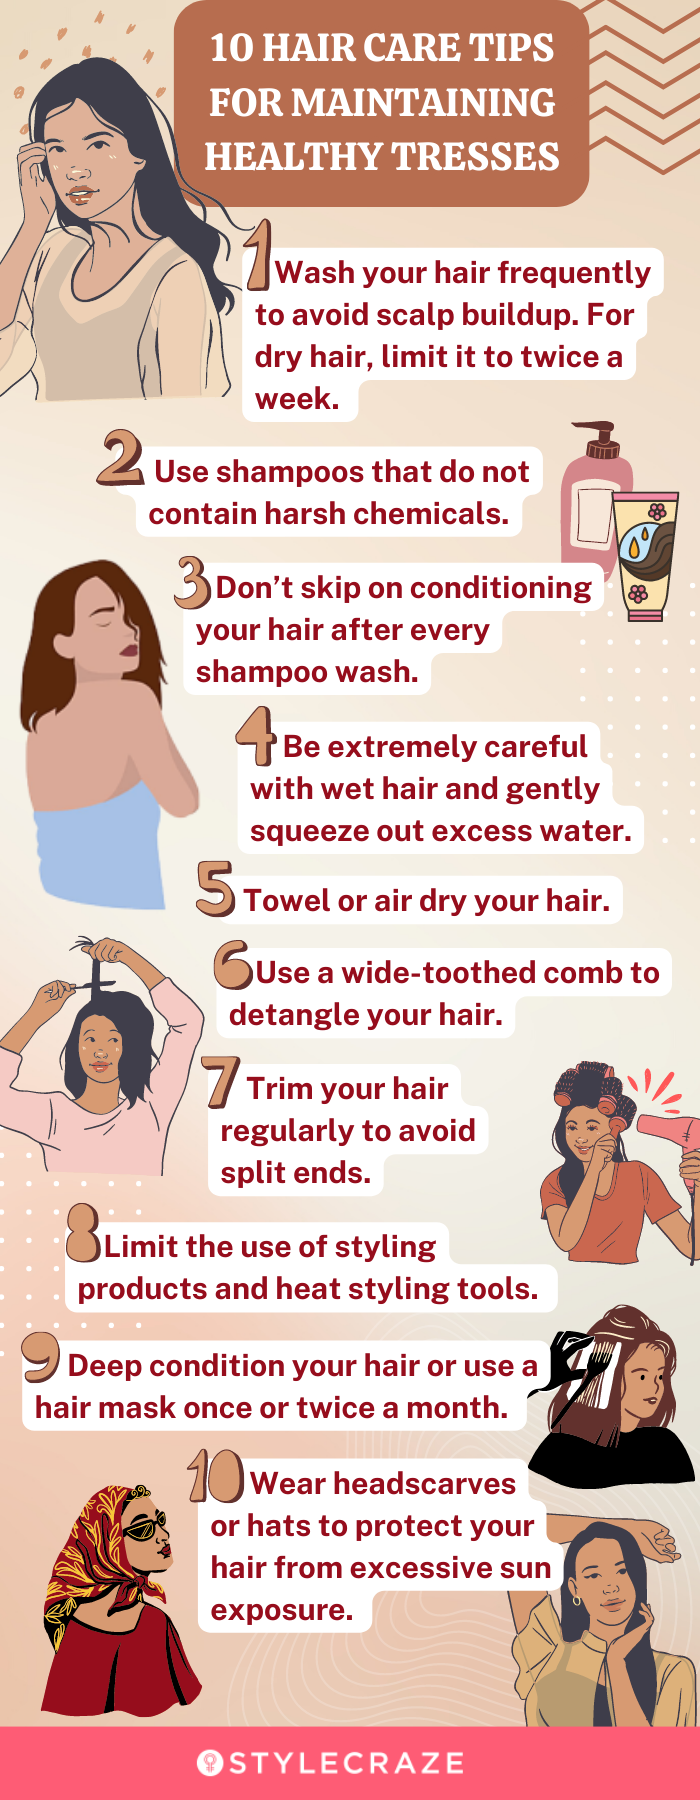 10 hair care tips for maintaining healthy tresses [infographic]